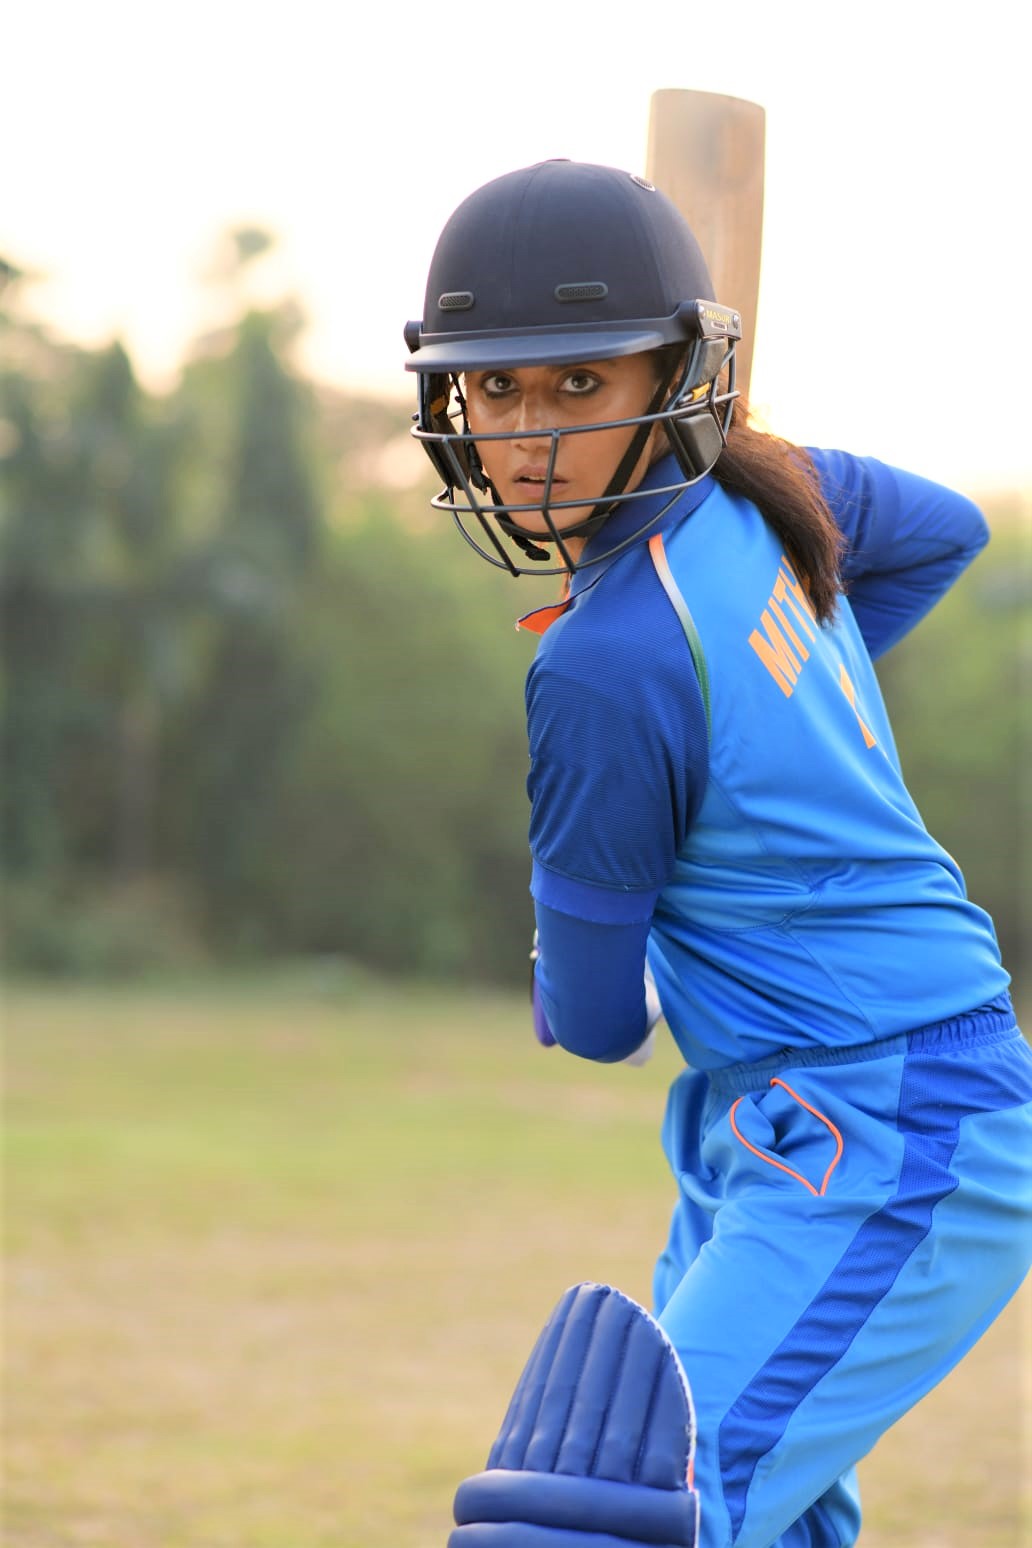 As the film Shabaash Mithu is set to showcase cricketer Mithali Raj’s journey on screen, here is a look at upcoming sports films where women take the lead